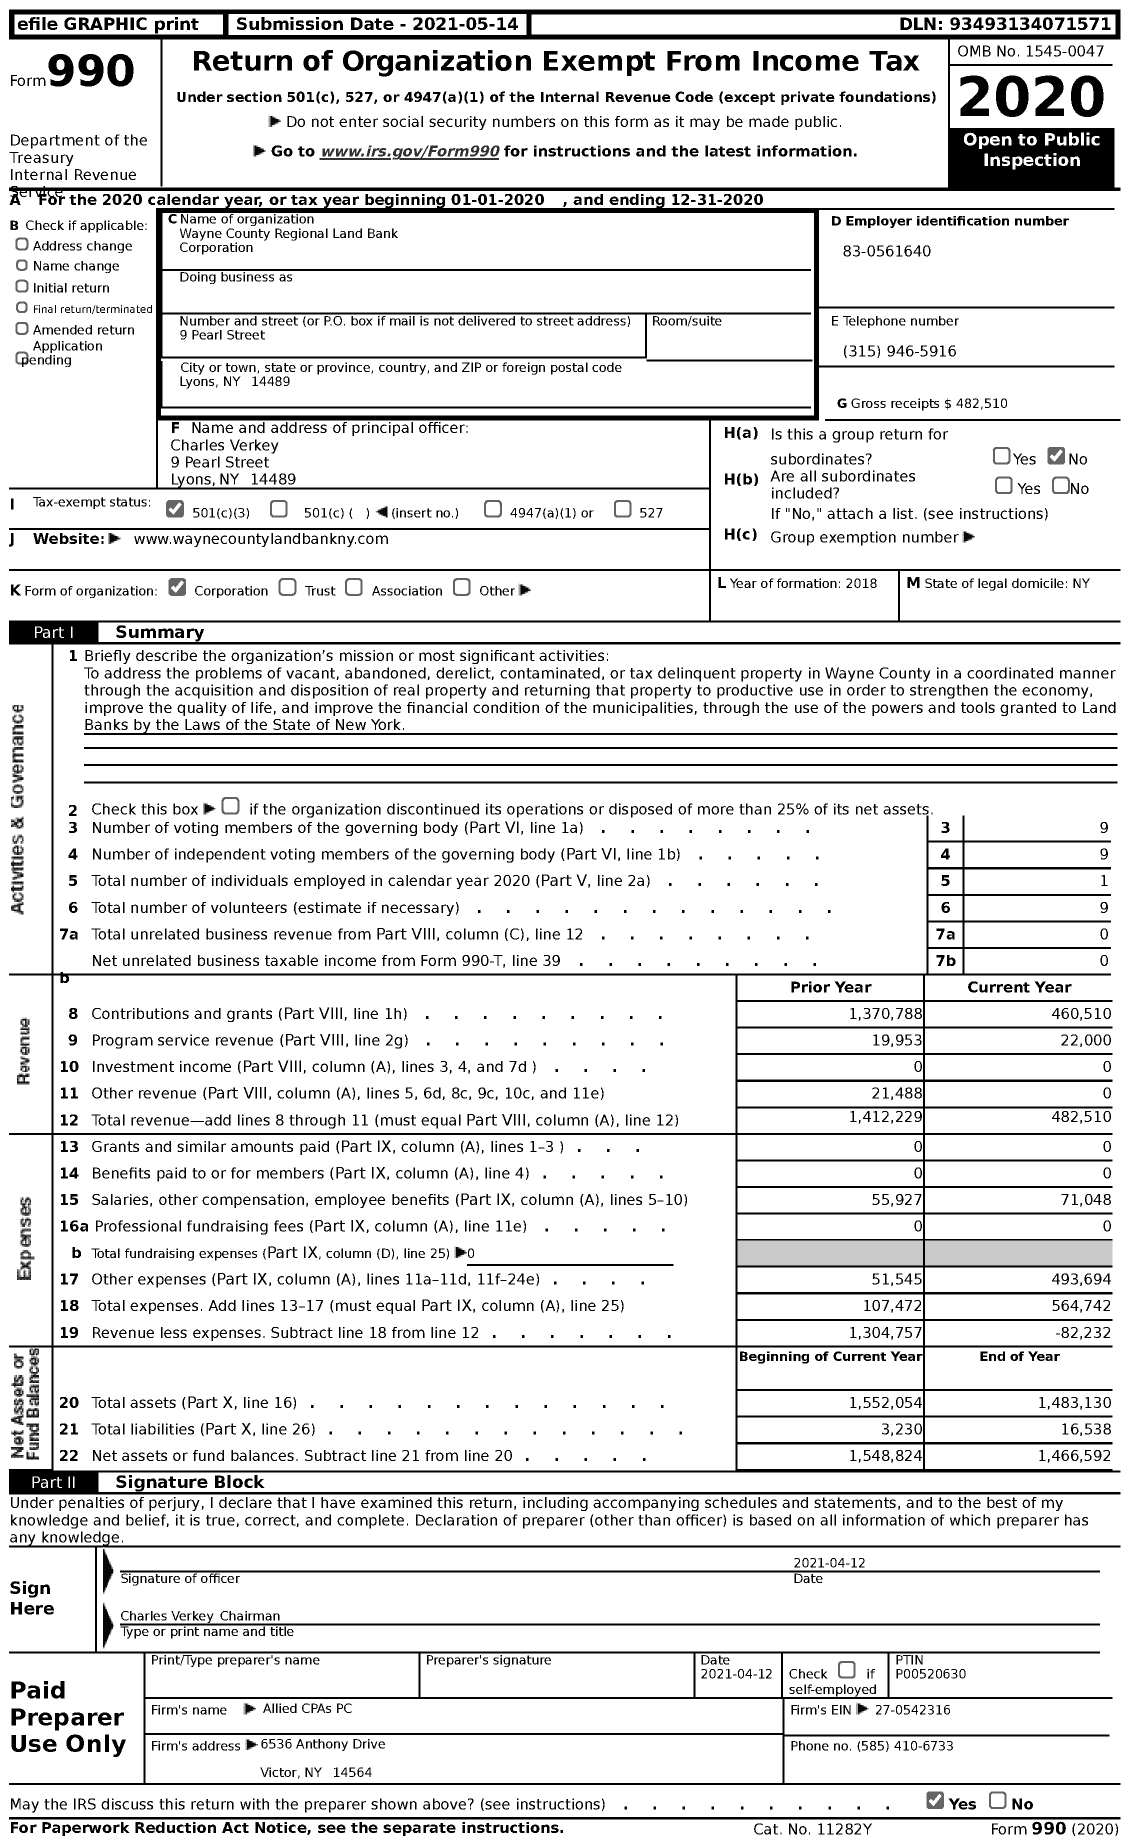 Image of first page of 2020 Form 990 for Wayne County Regional Land Bank Corporation